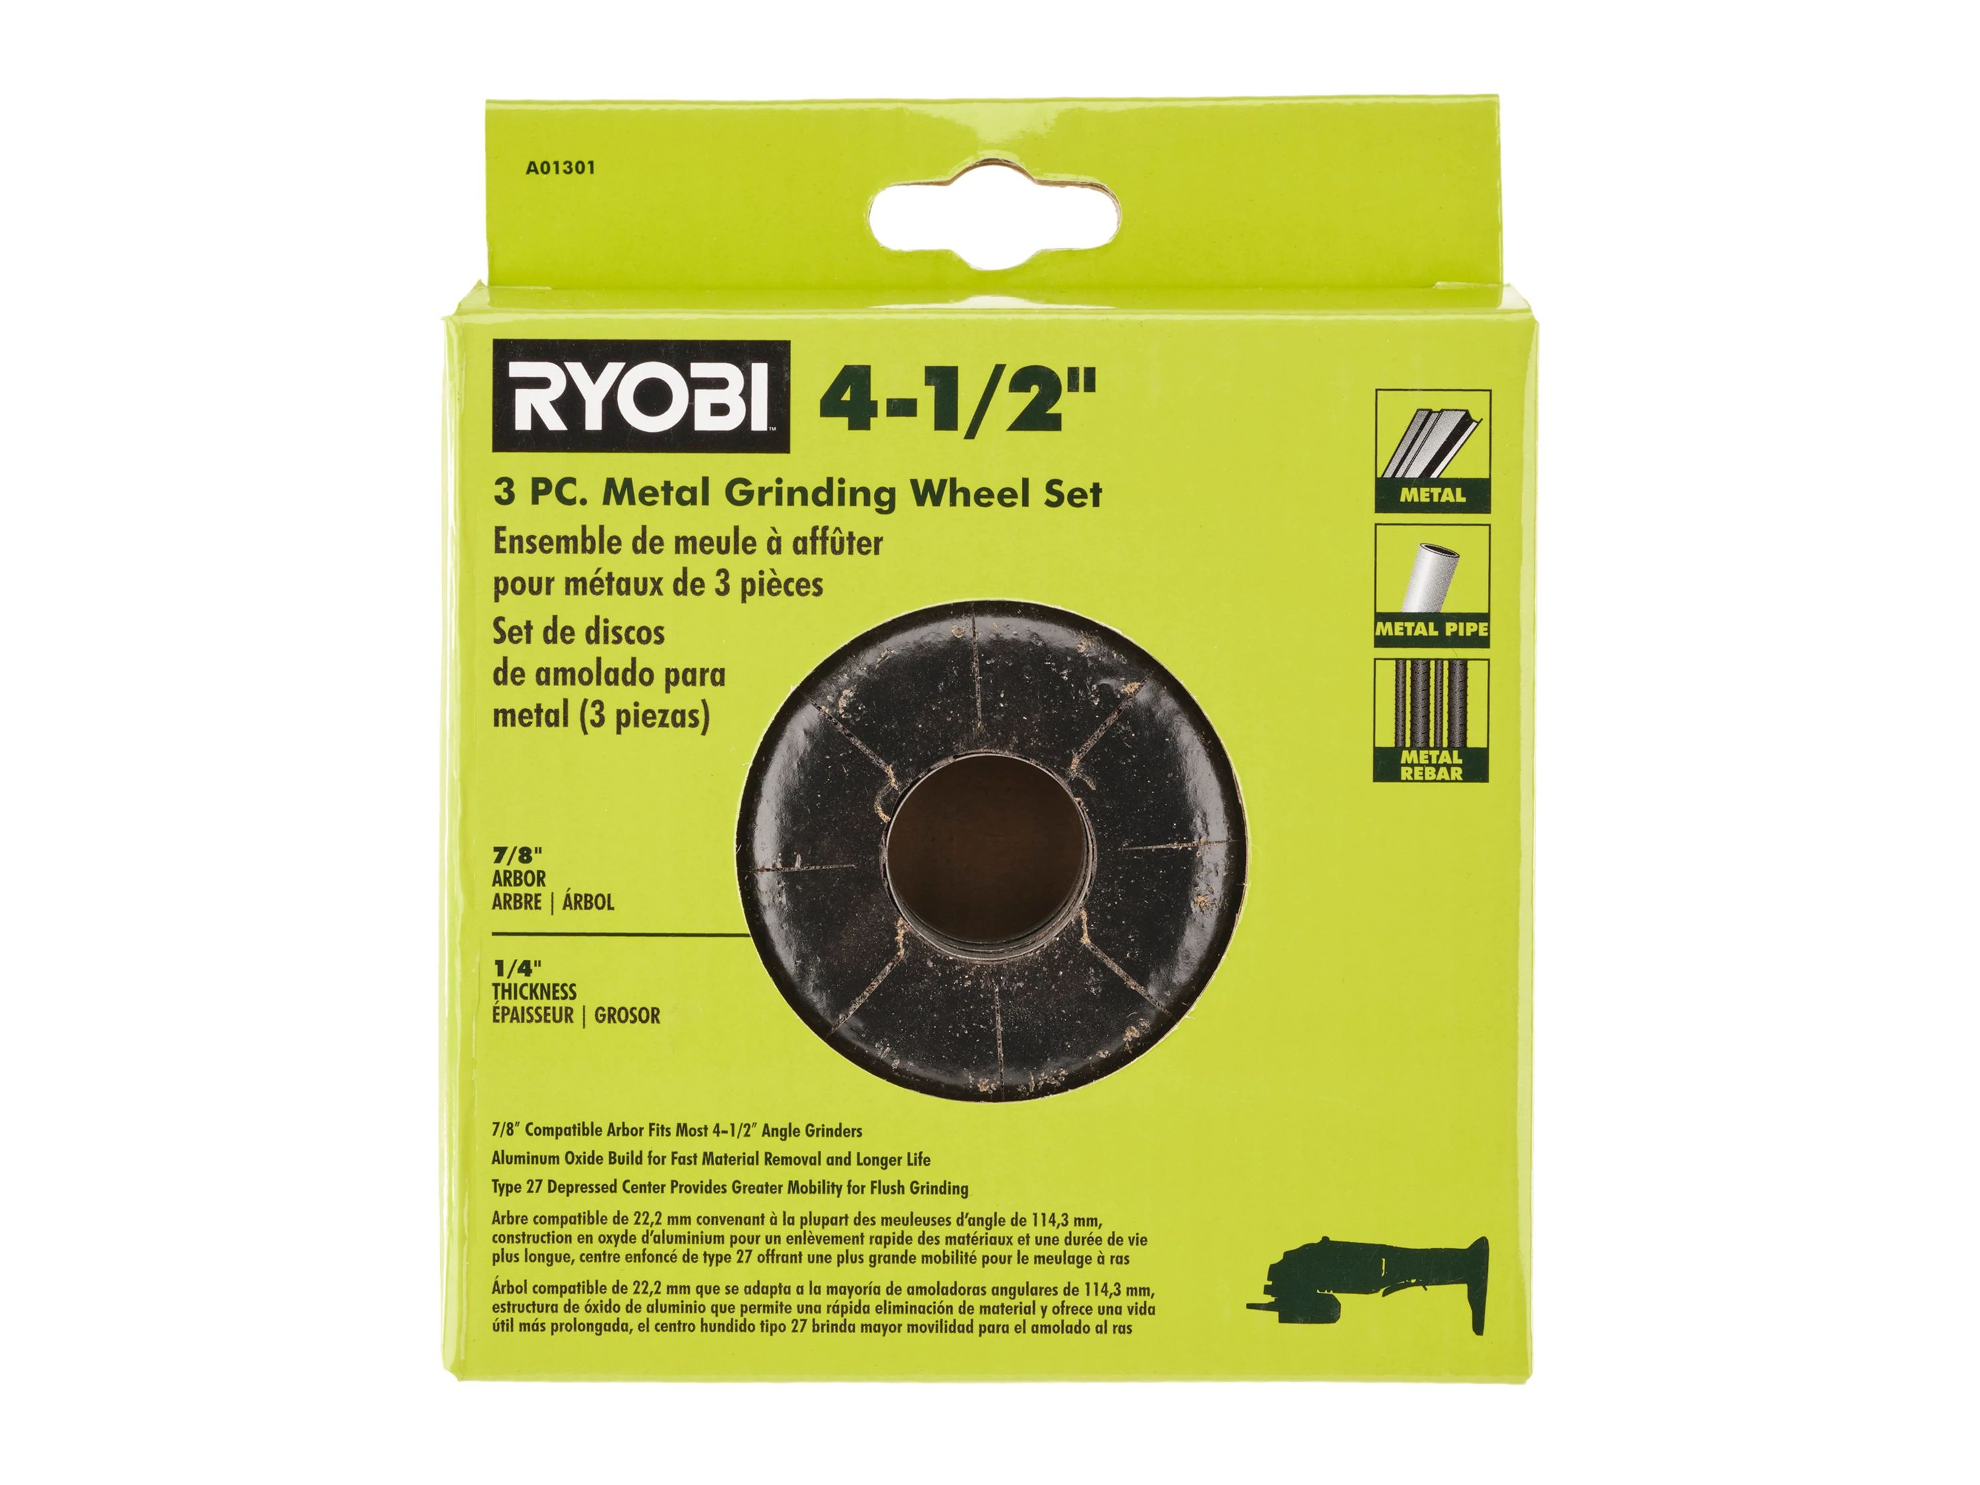 Product Features Image for 3 PC. 4-1/2" METAL GRINDING WHEEL SET.